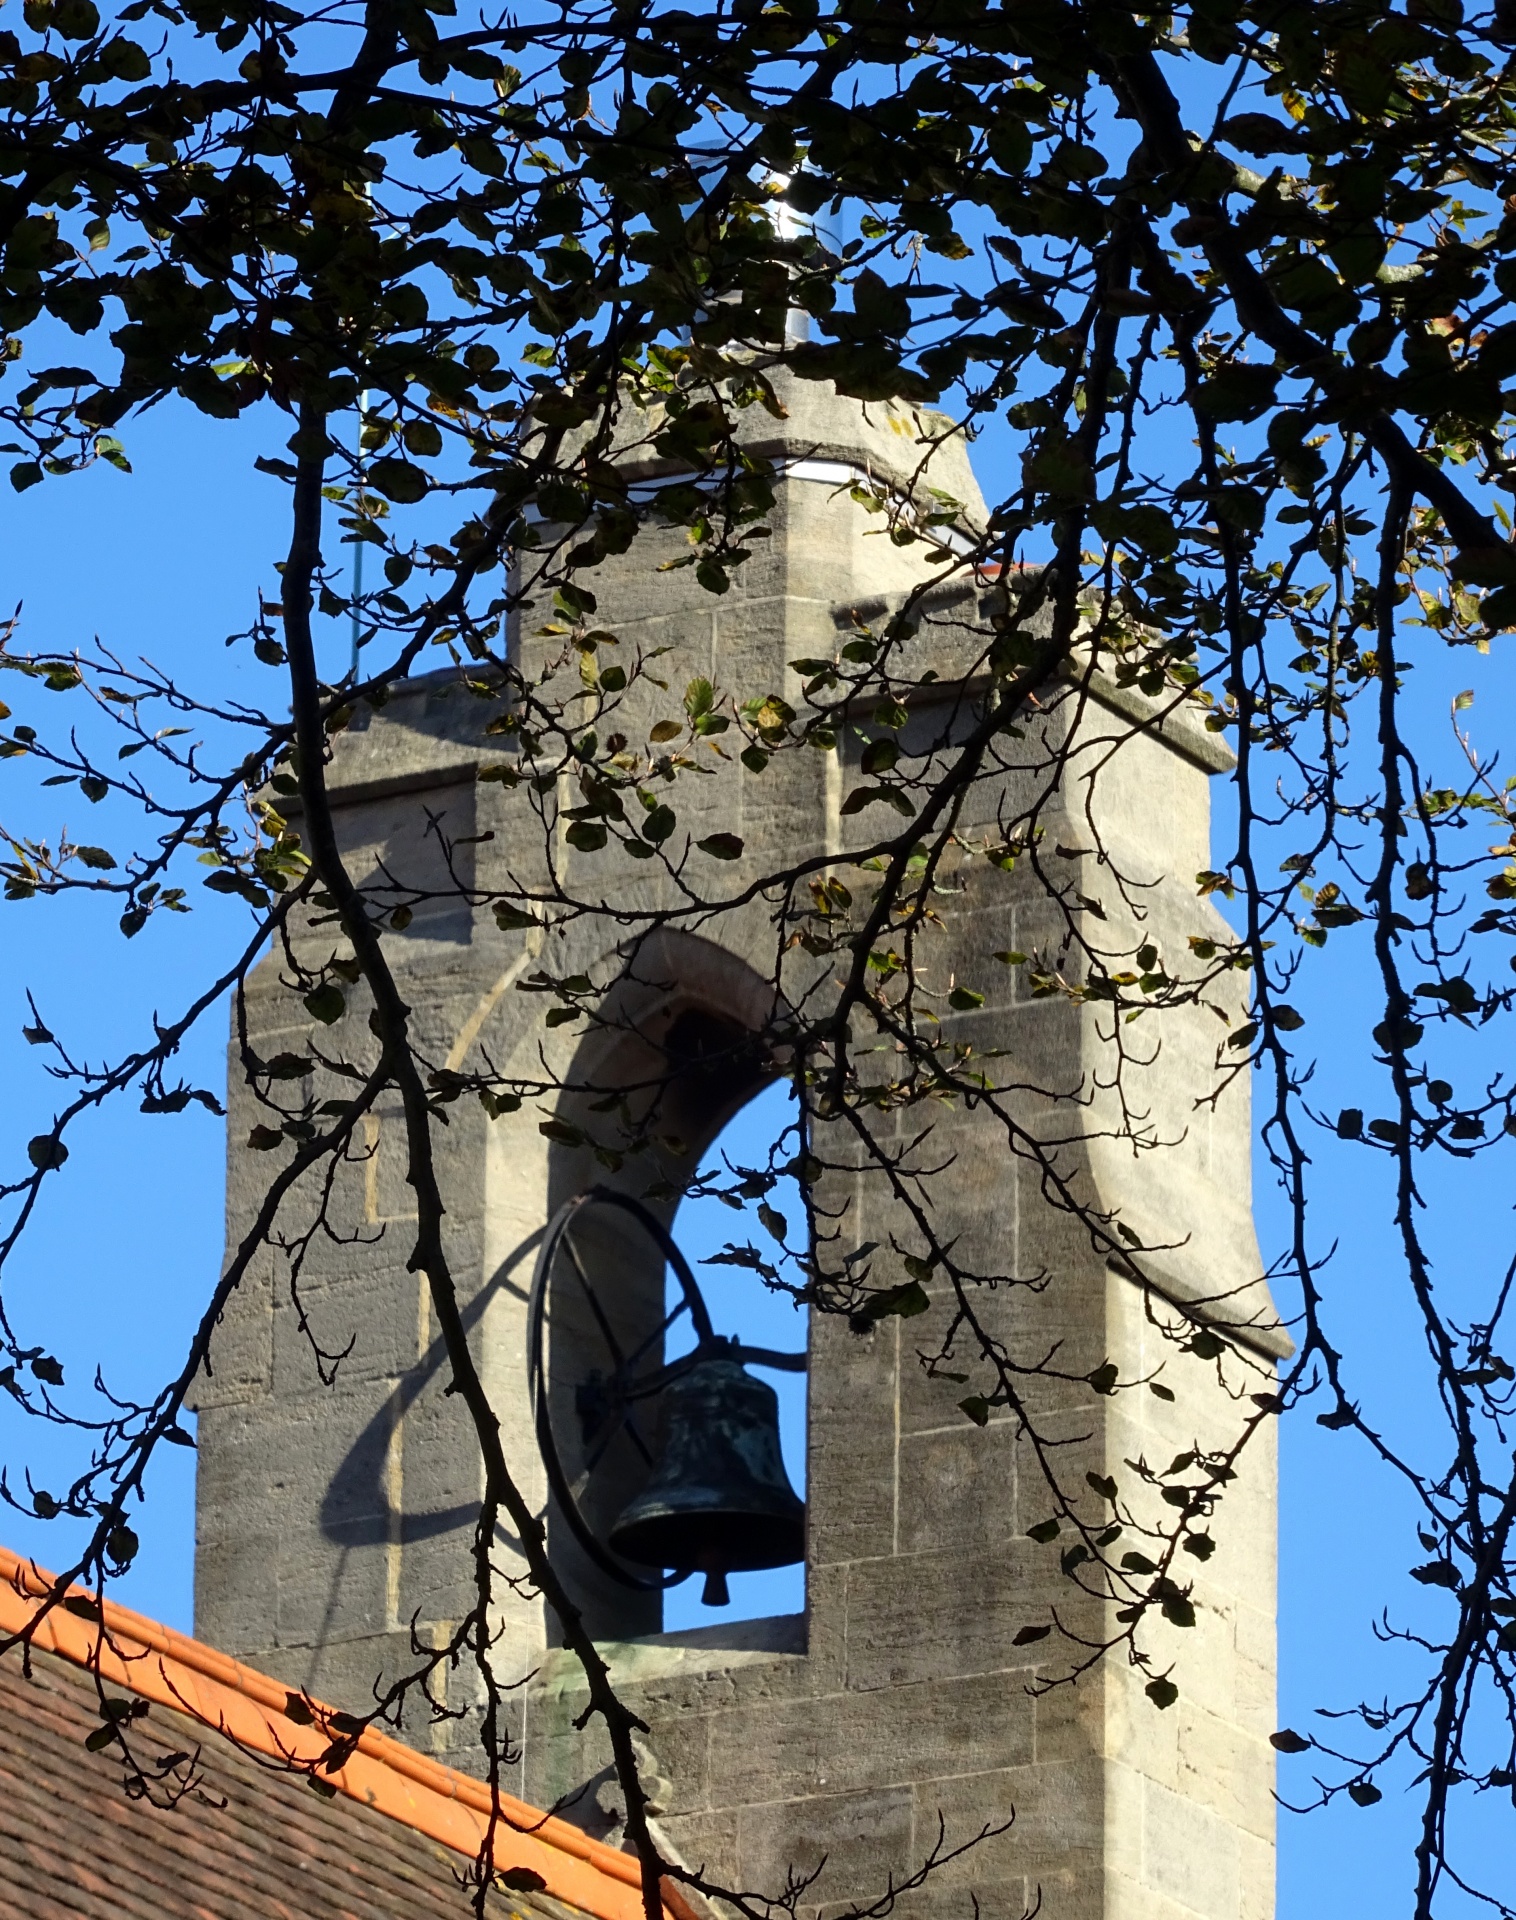 Church Bell Tower With Tree Branches In The Foreground